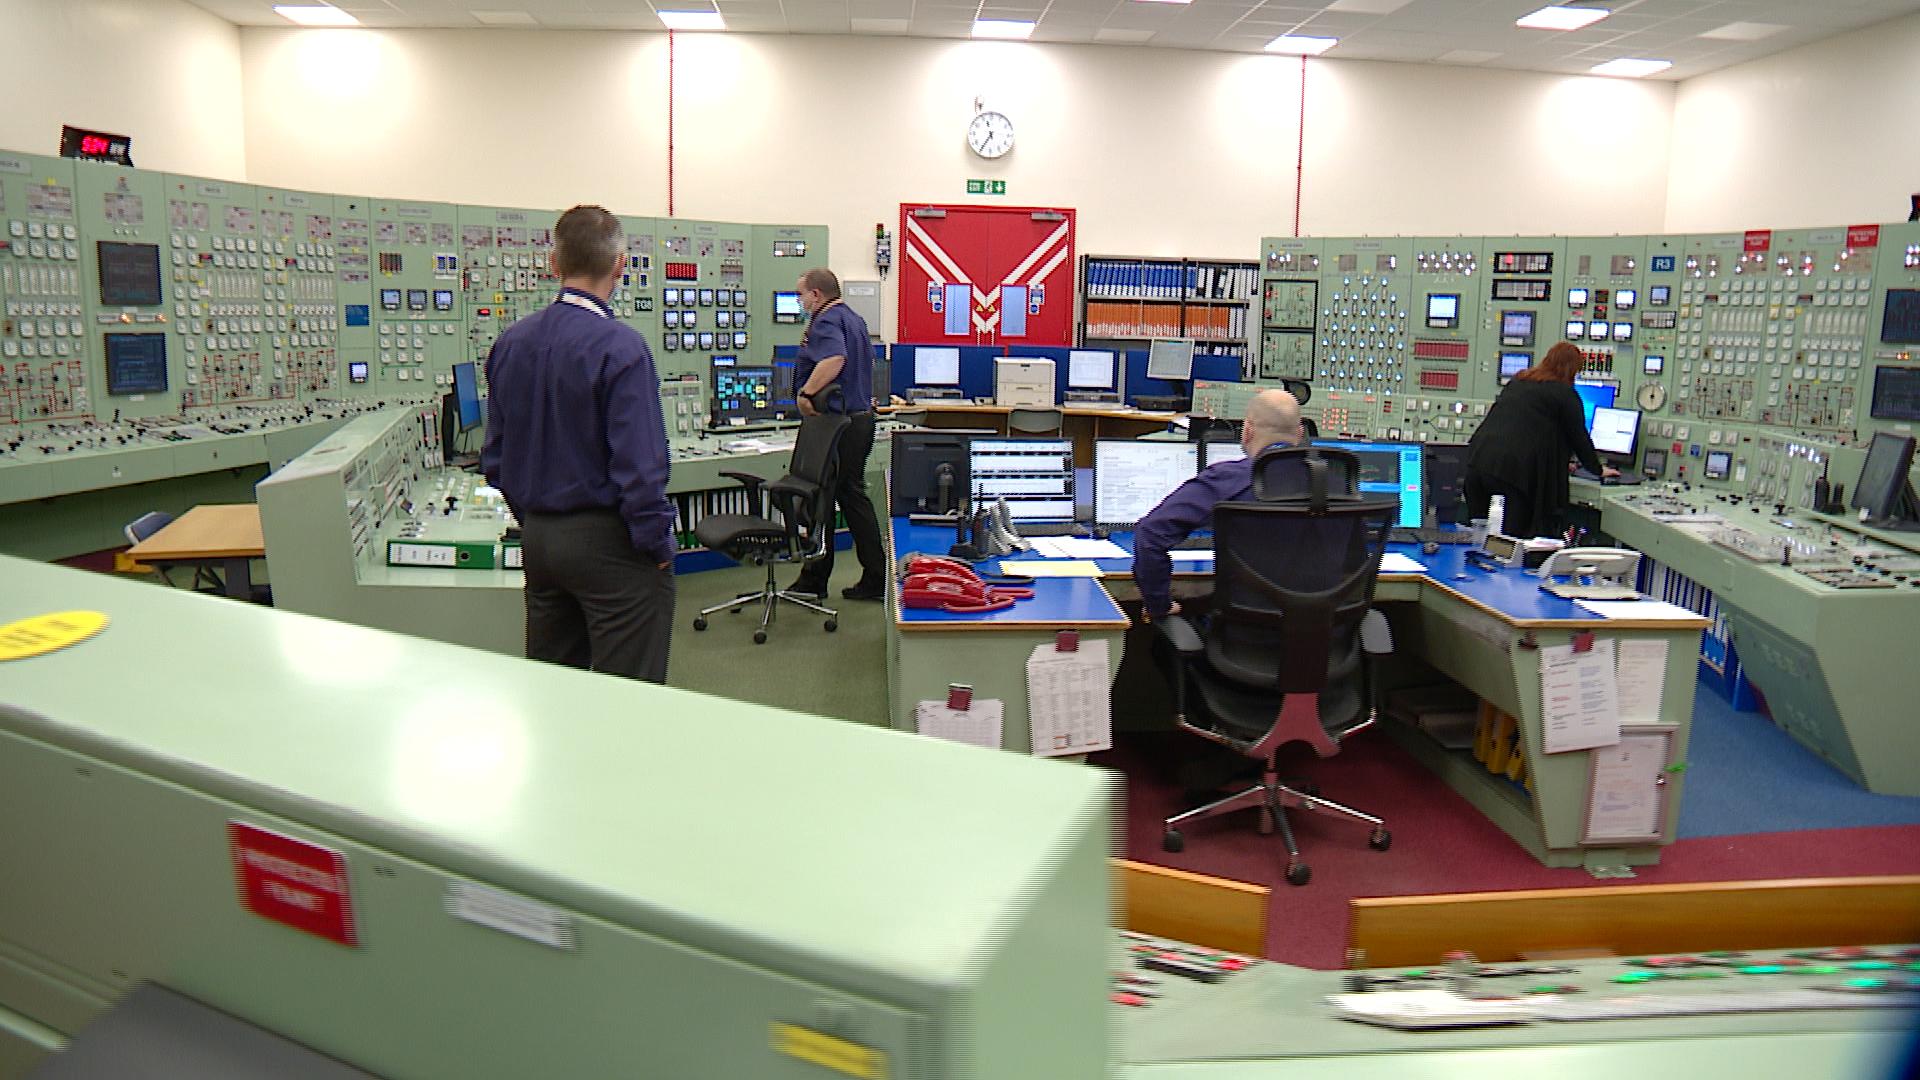 The high-security control room at Hunterston B.